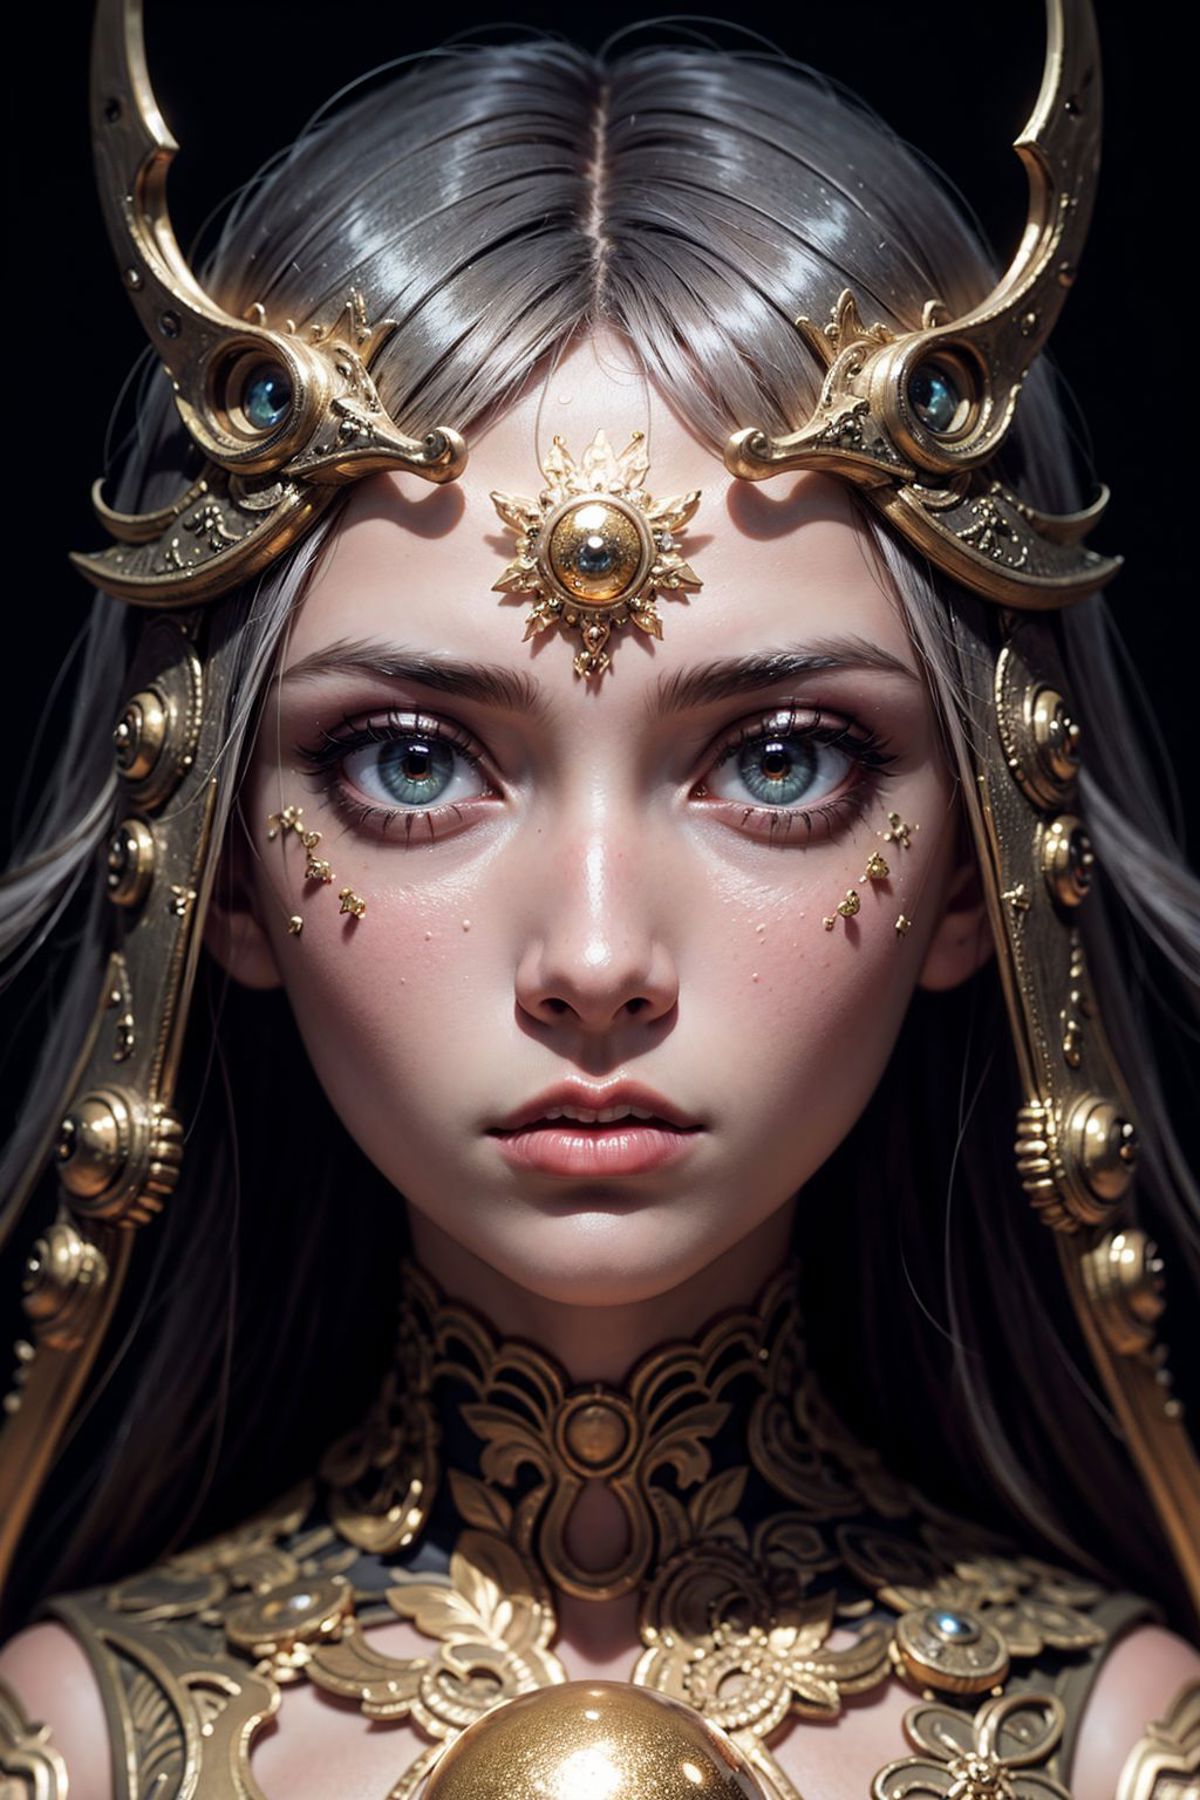 A digital art portrait of a woman with blue eyes and a gold, jewel-encrusted crown and headpiece.